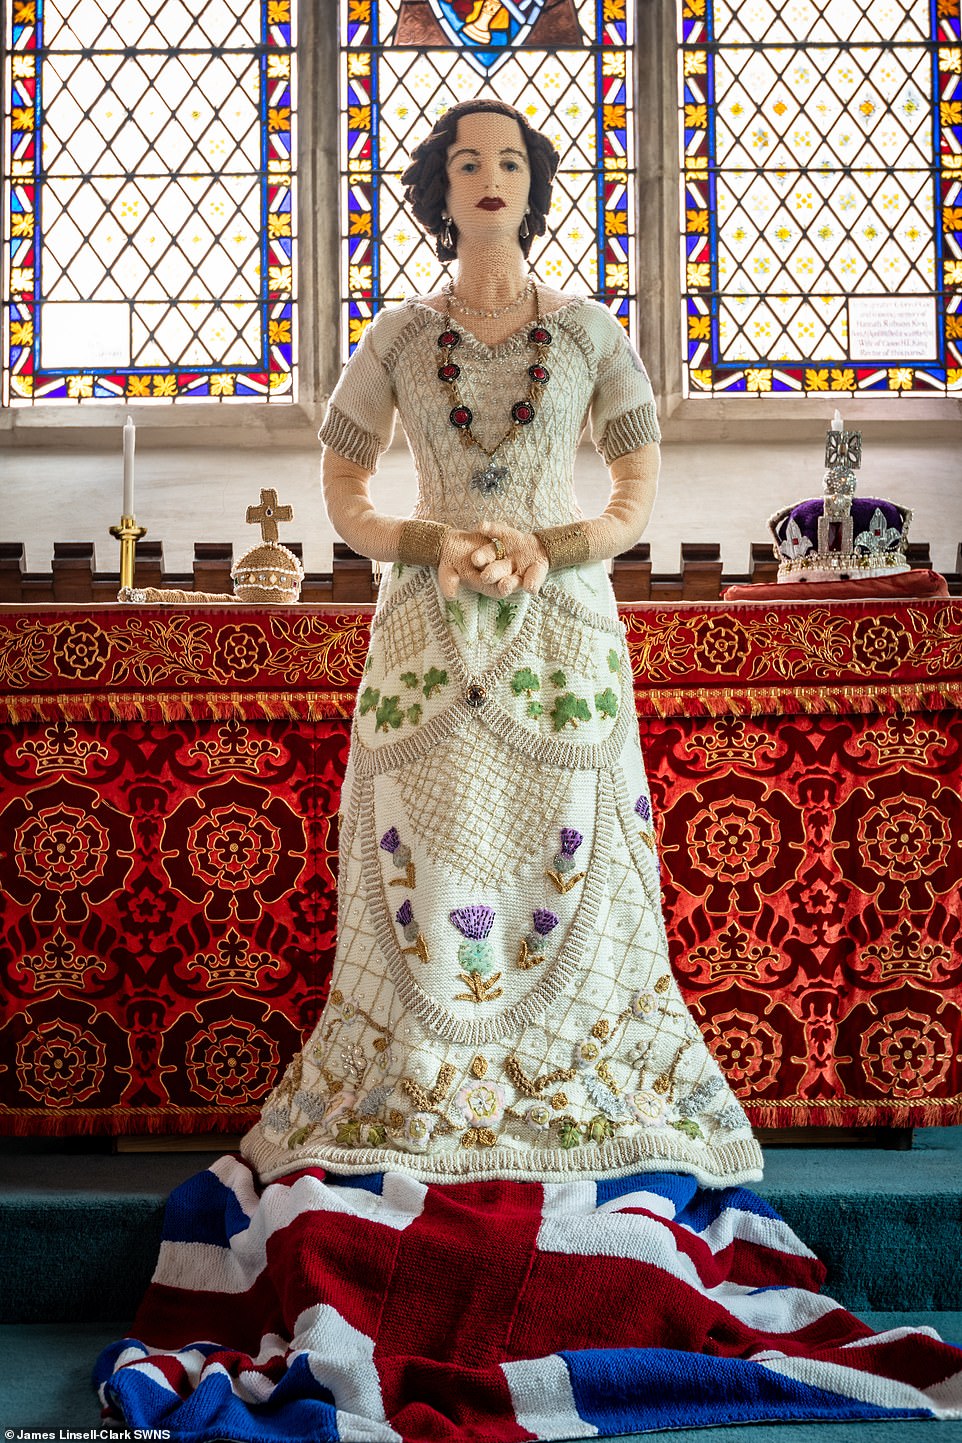 They Knit a Life-Sized Model of the Queen & Recreated Life In The Year Of Her 1953 Coronation